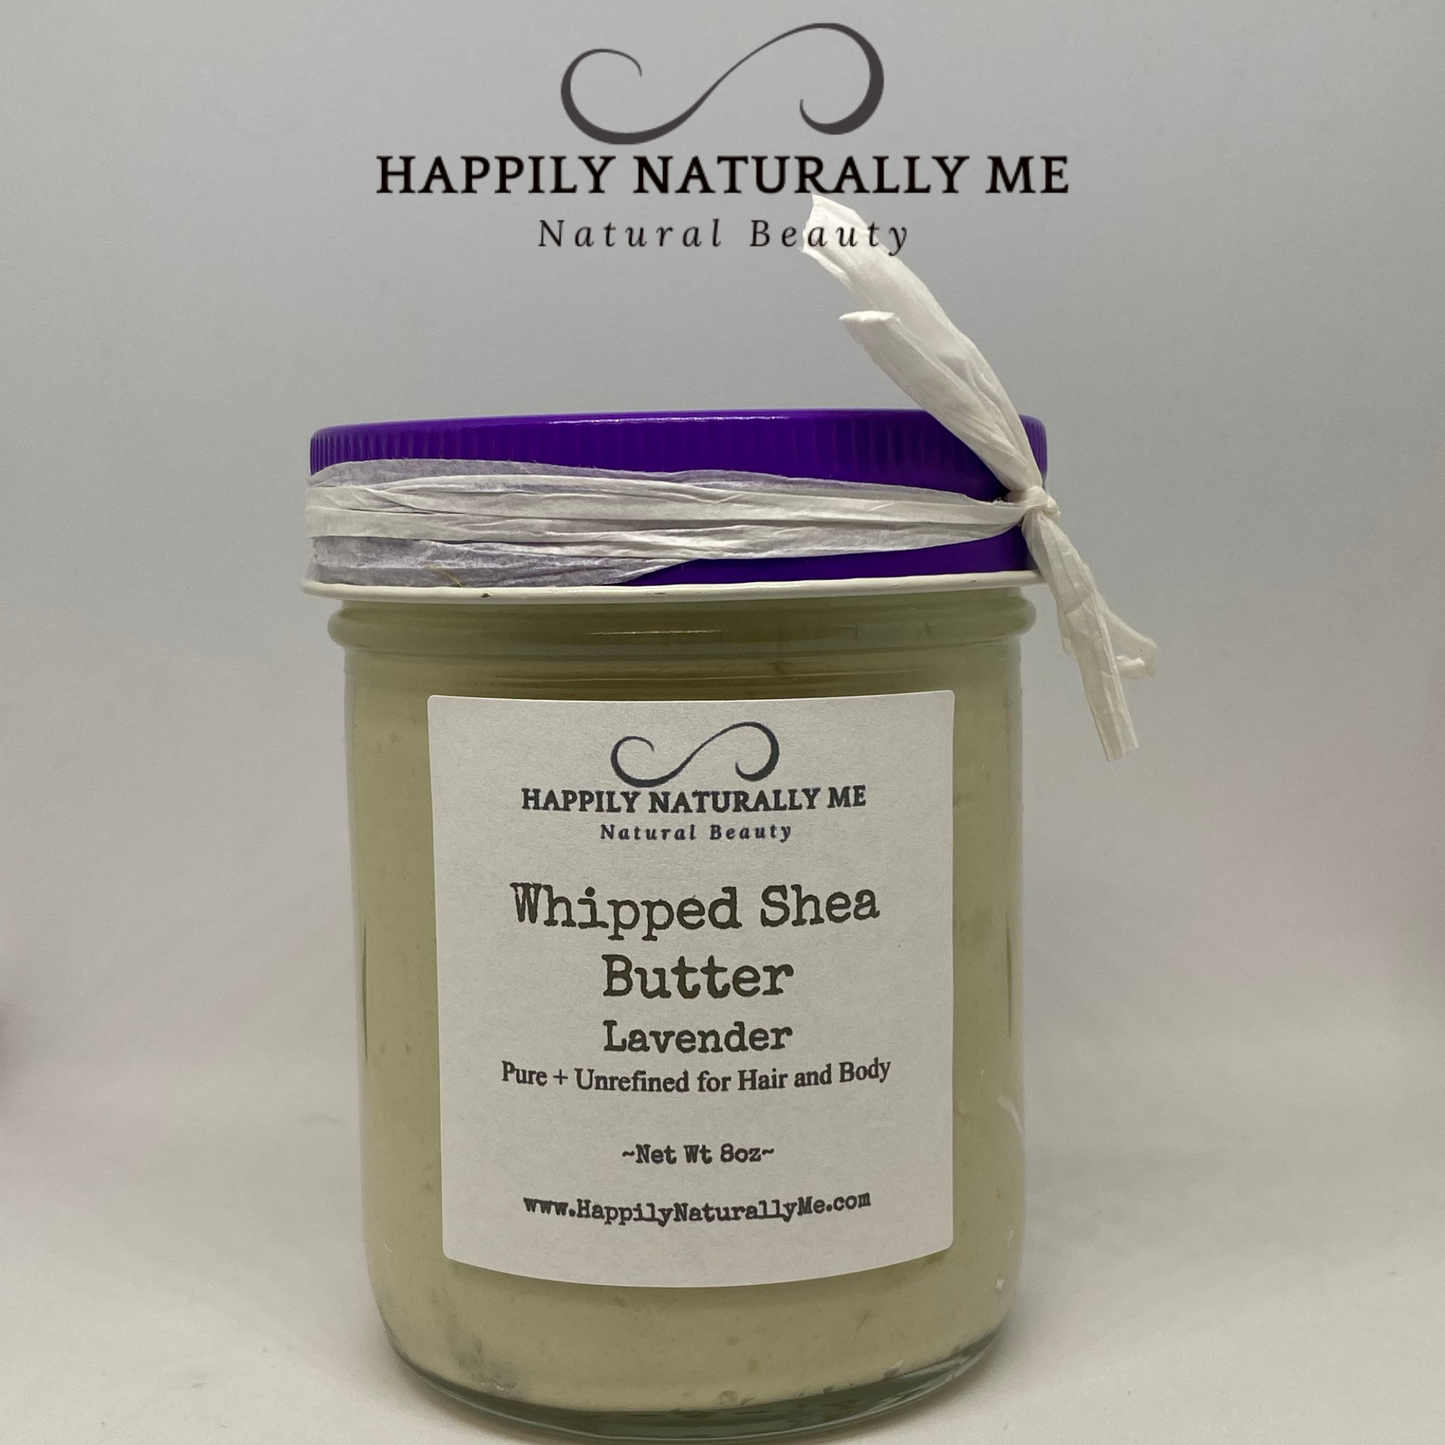 Whipped Shea Butter-Lavender